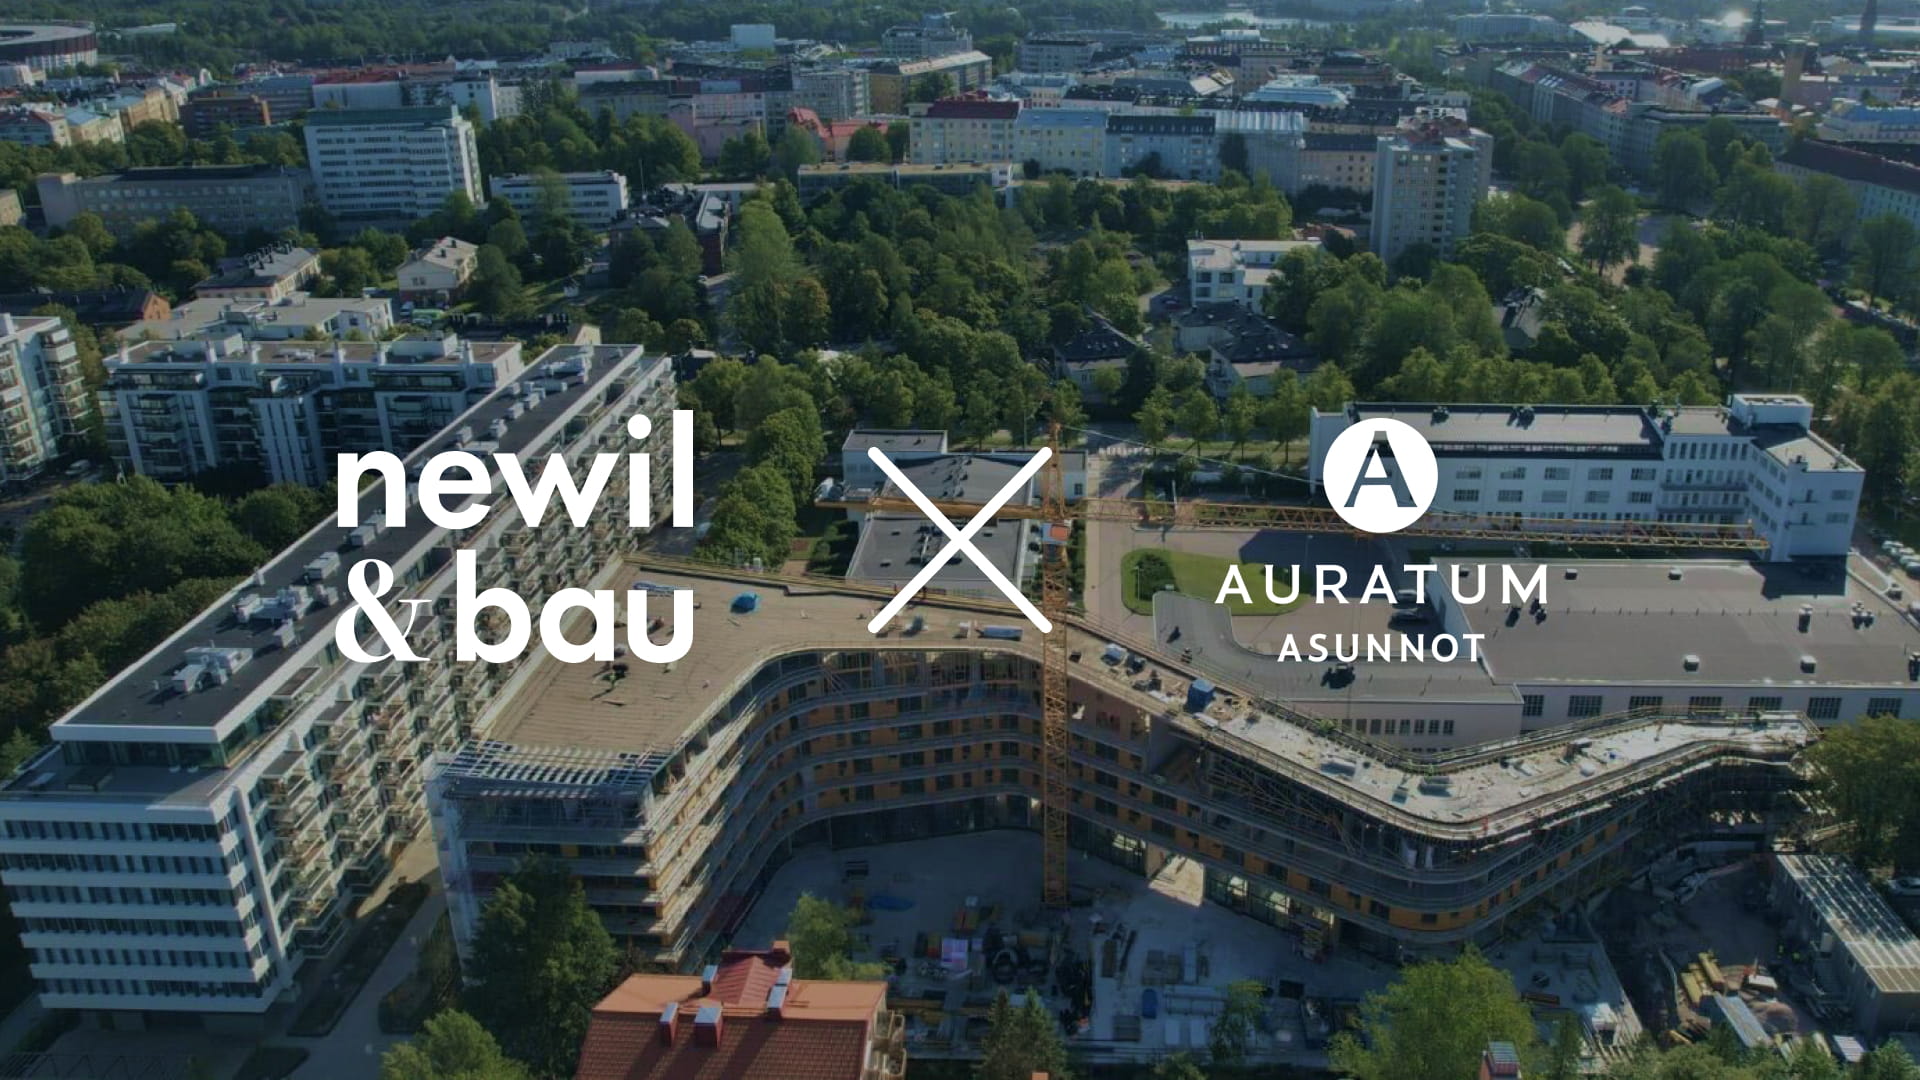 Newil&Bau expands to Turku by acquiring Auratum Asunnot and raises new equity in funding round led by Rausanne